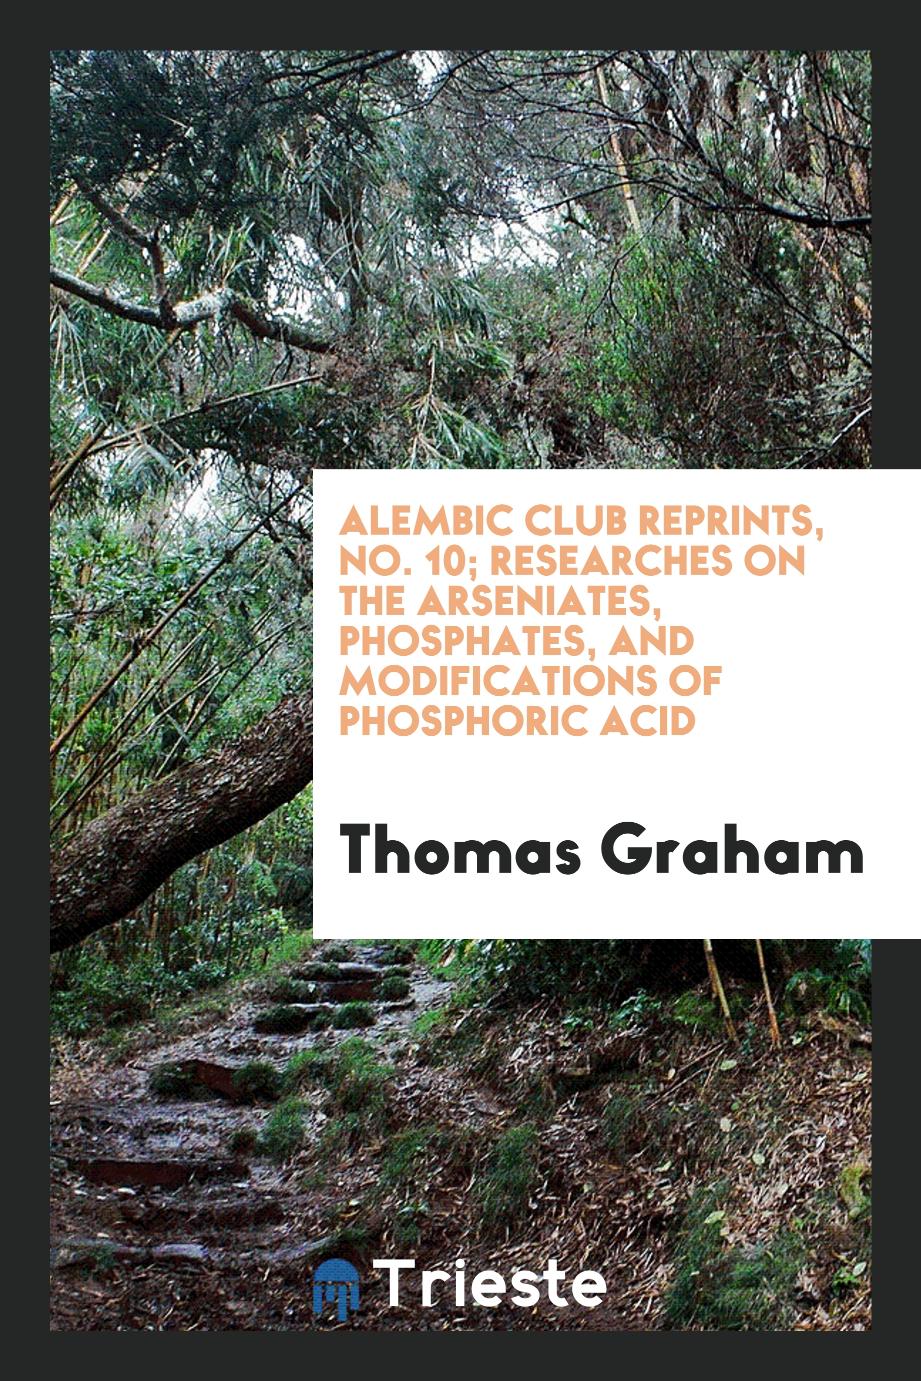 Alembic Club Reprints, No. 10; Researches on the arseniates, phosphates, and modifications of phosphoric acid